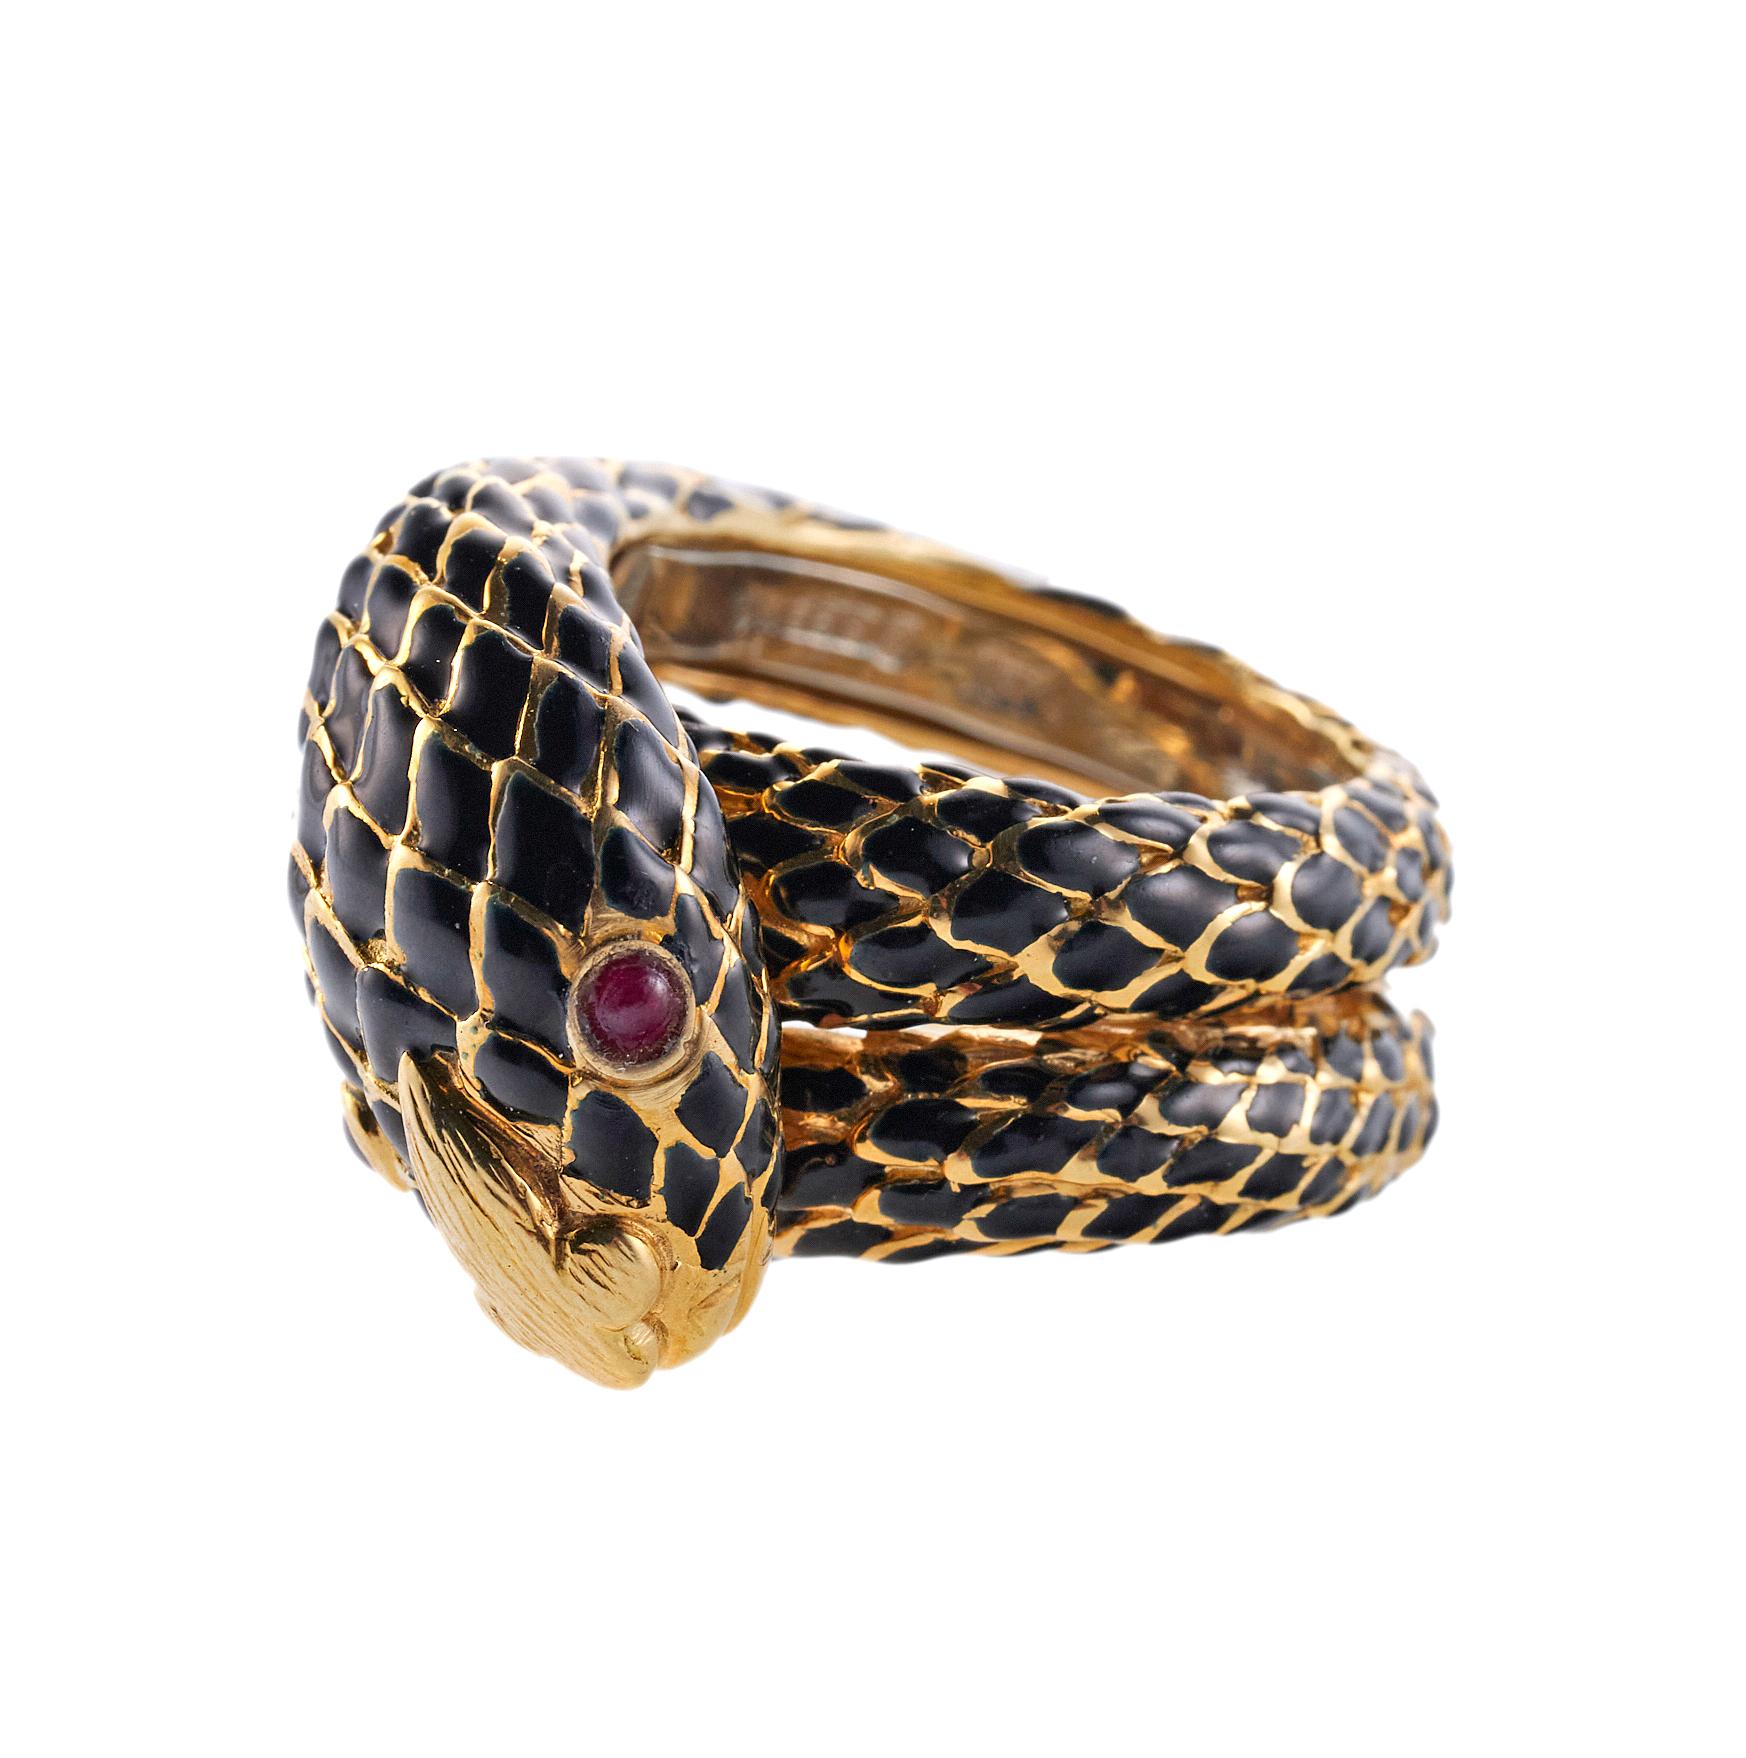 David Webb 18K yellow gold and black enamel wrap snake ring set with ruby eyes. Ring size 6, top measures 20mm wide. Marked: Webb, 18k. Weight is 25.7 grams.